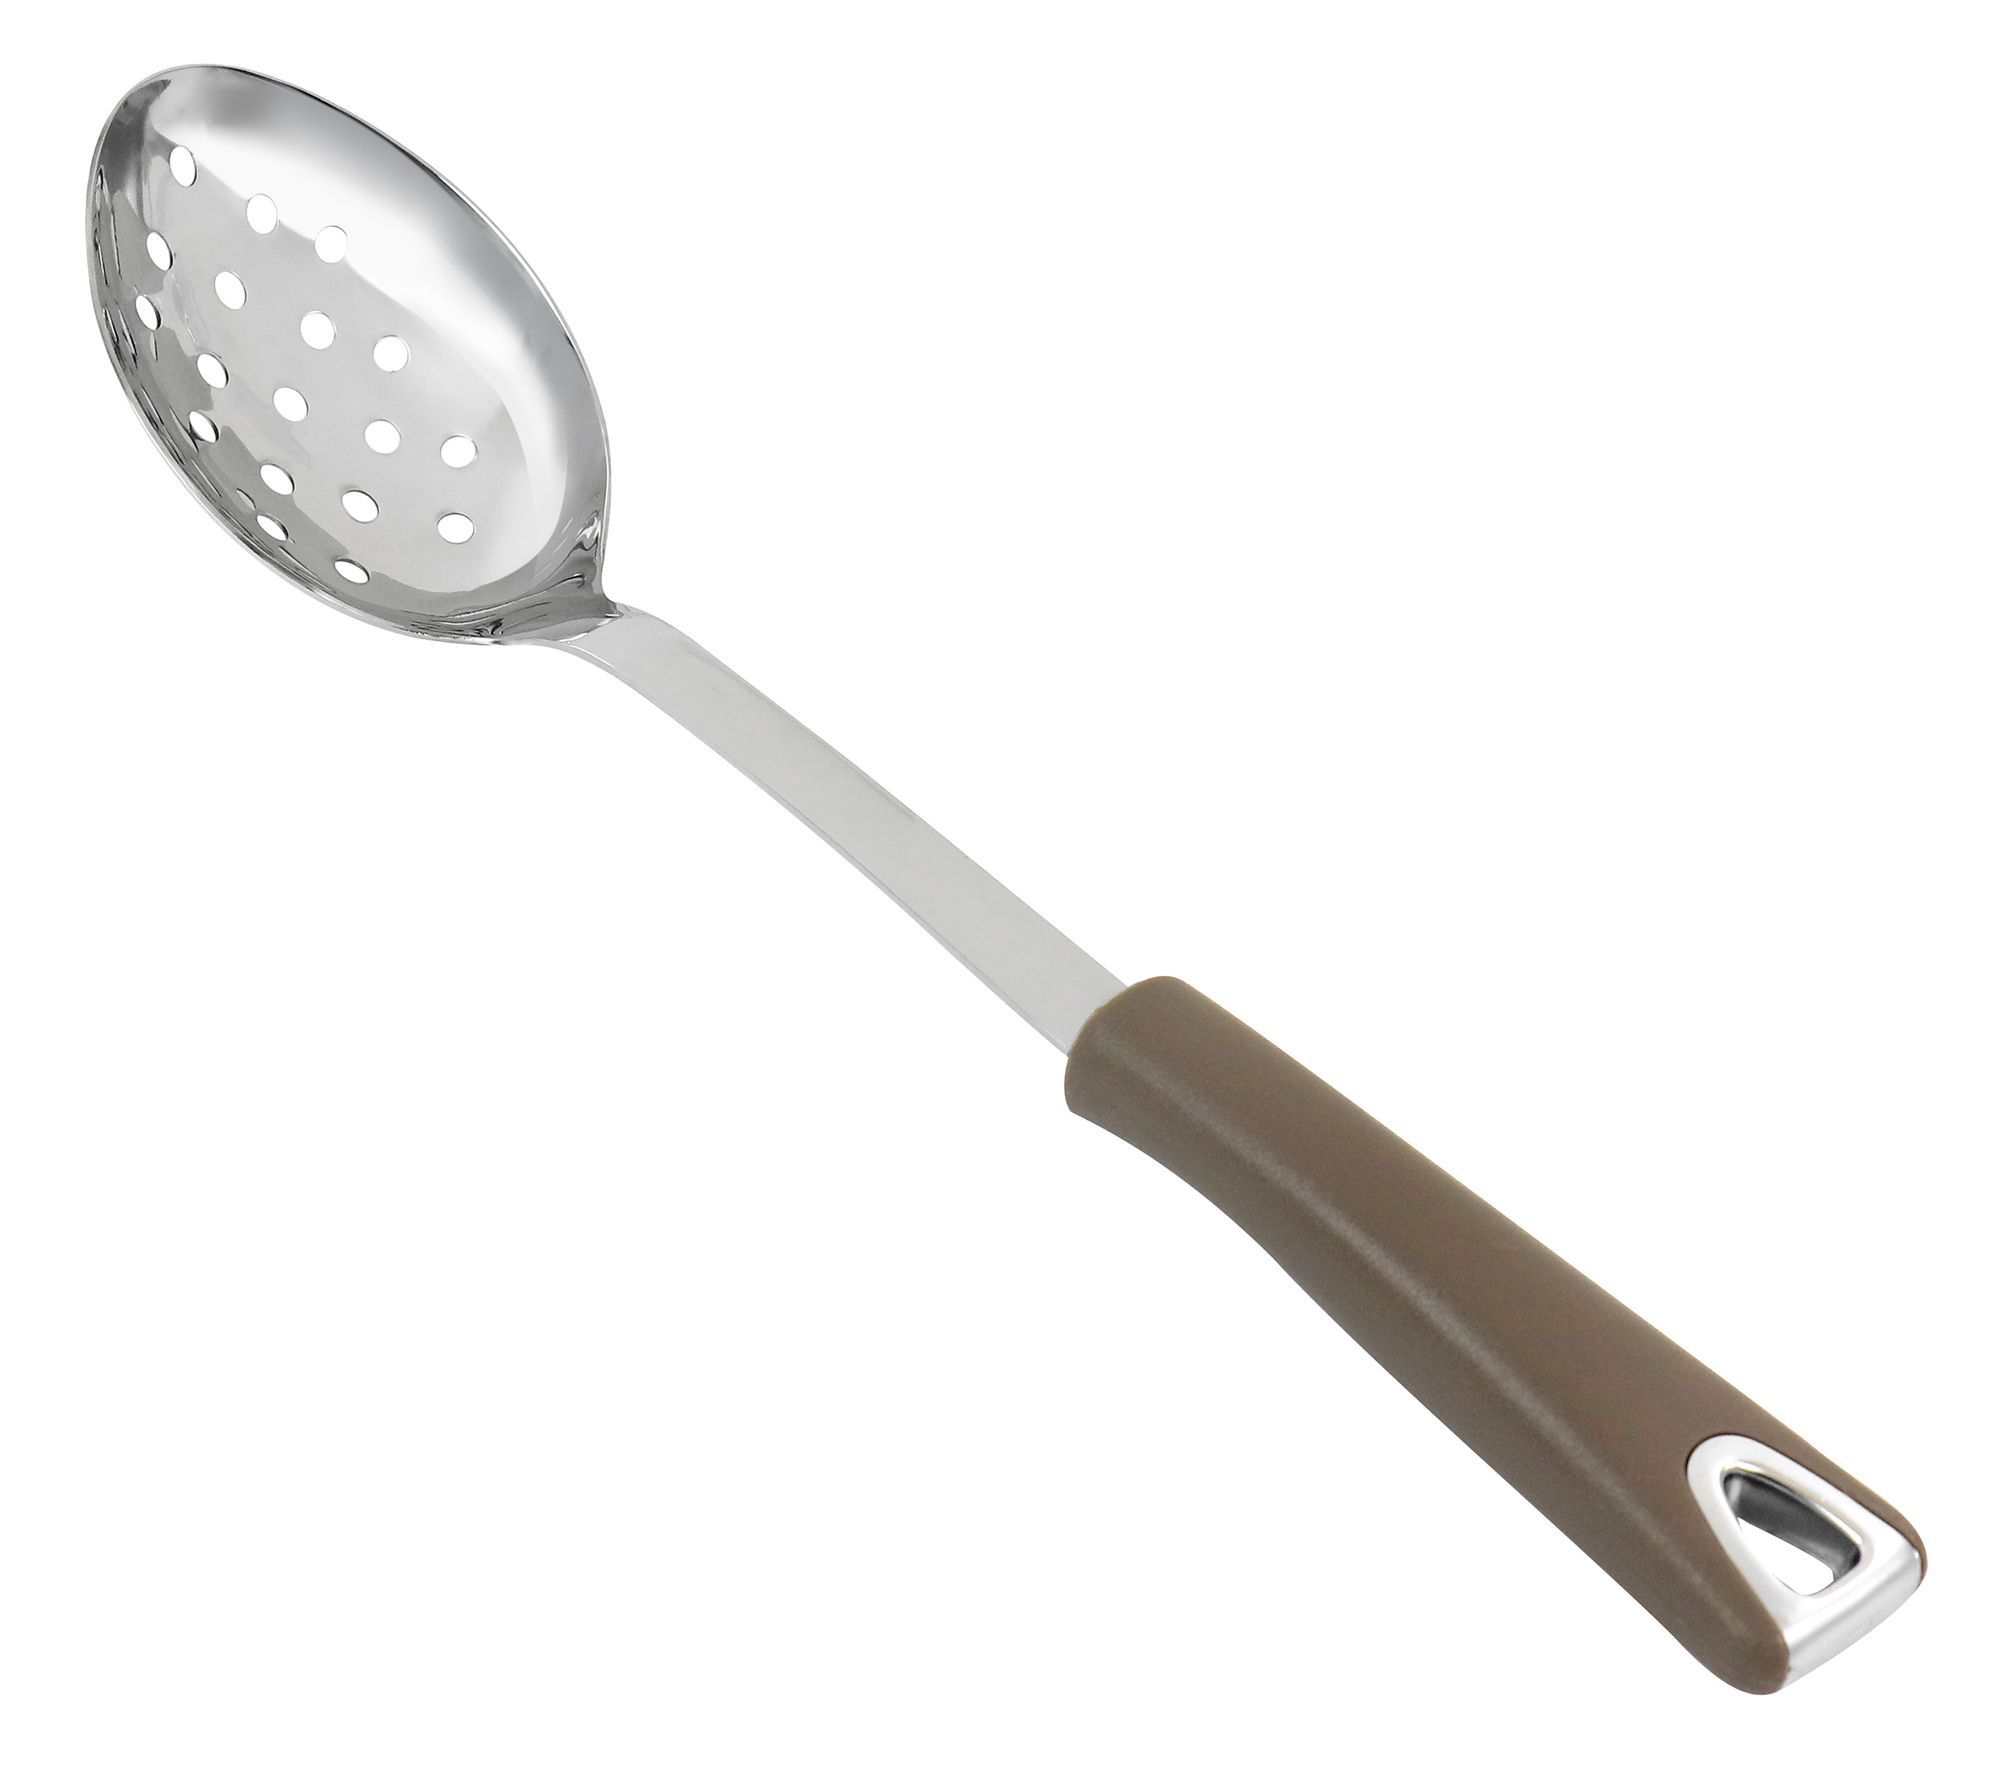 Le Creuset Revolution Wood Slotted Spoon